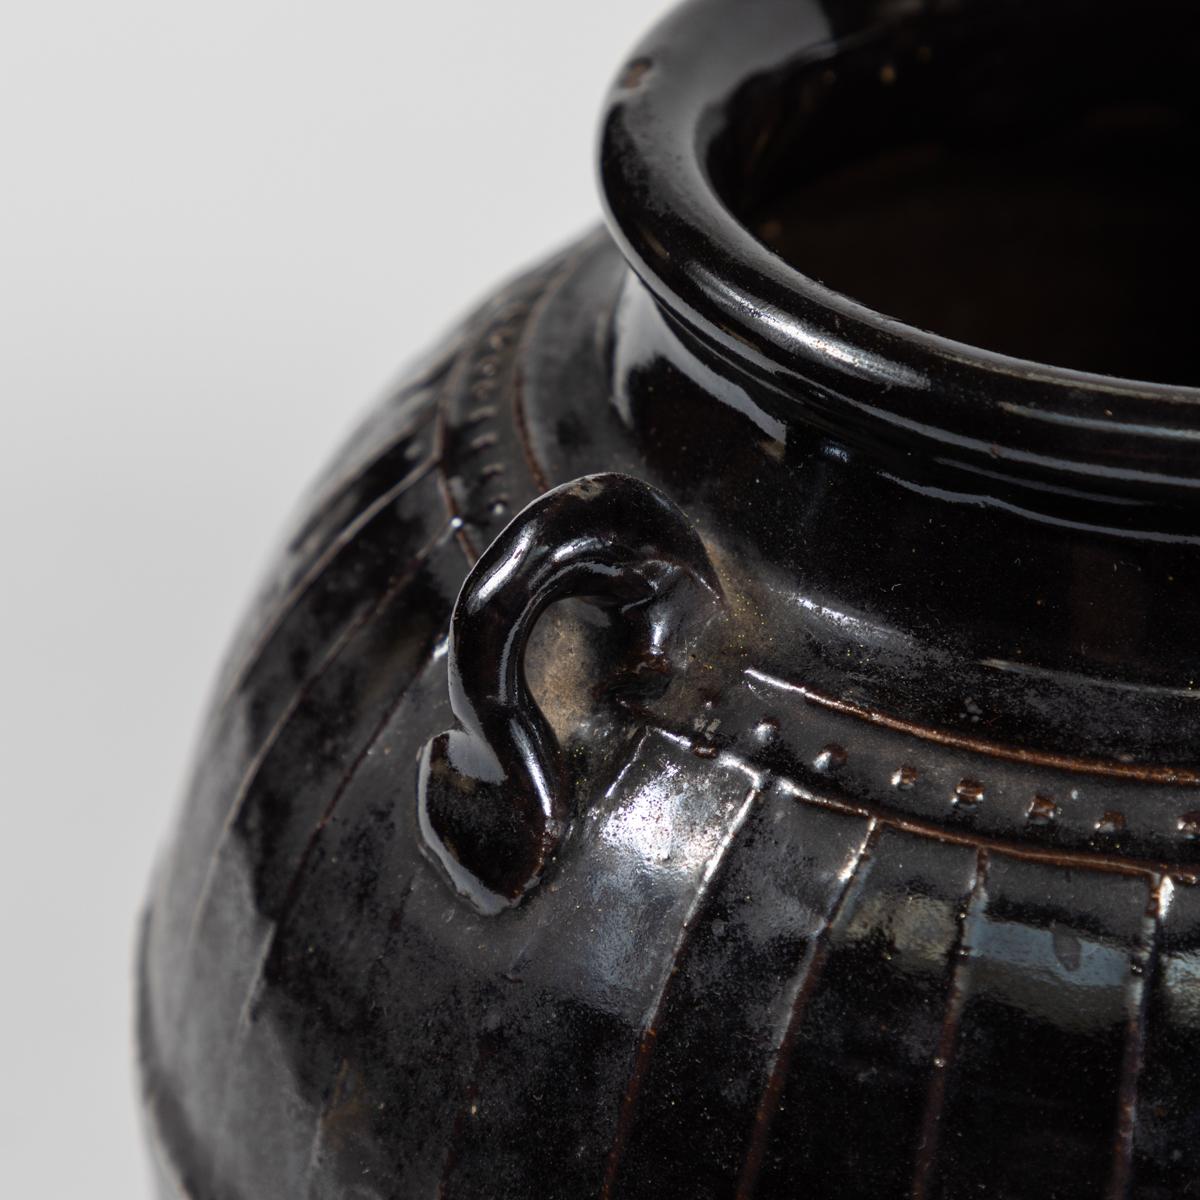 This ming style pot dates from the mid 19th century. It is finished in a black glaze and features a number of small handles near the rim. It measures 9 inches in height and 9.5 inches in diameter. 